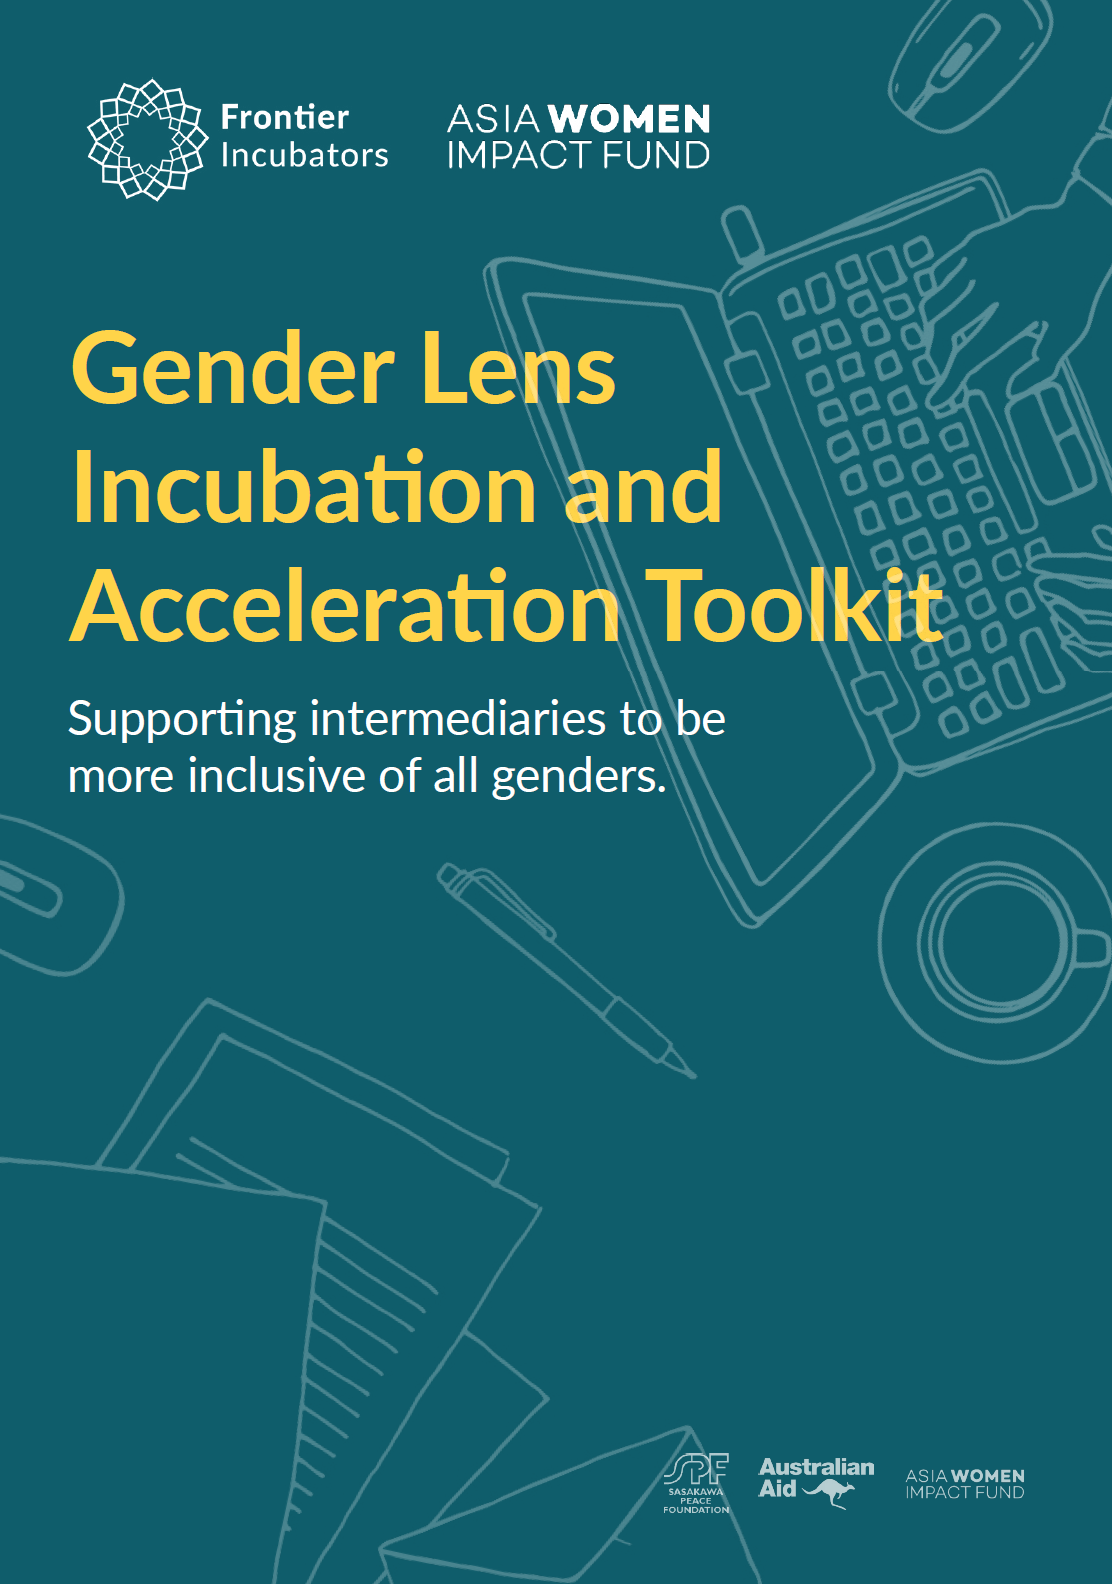 Gender Lens Incubation and Acceleration (GLIA) Toolkit